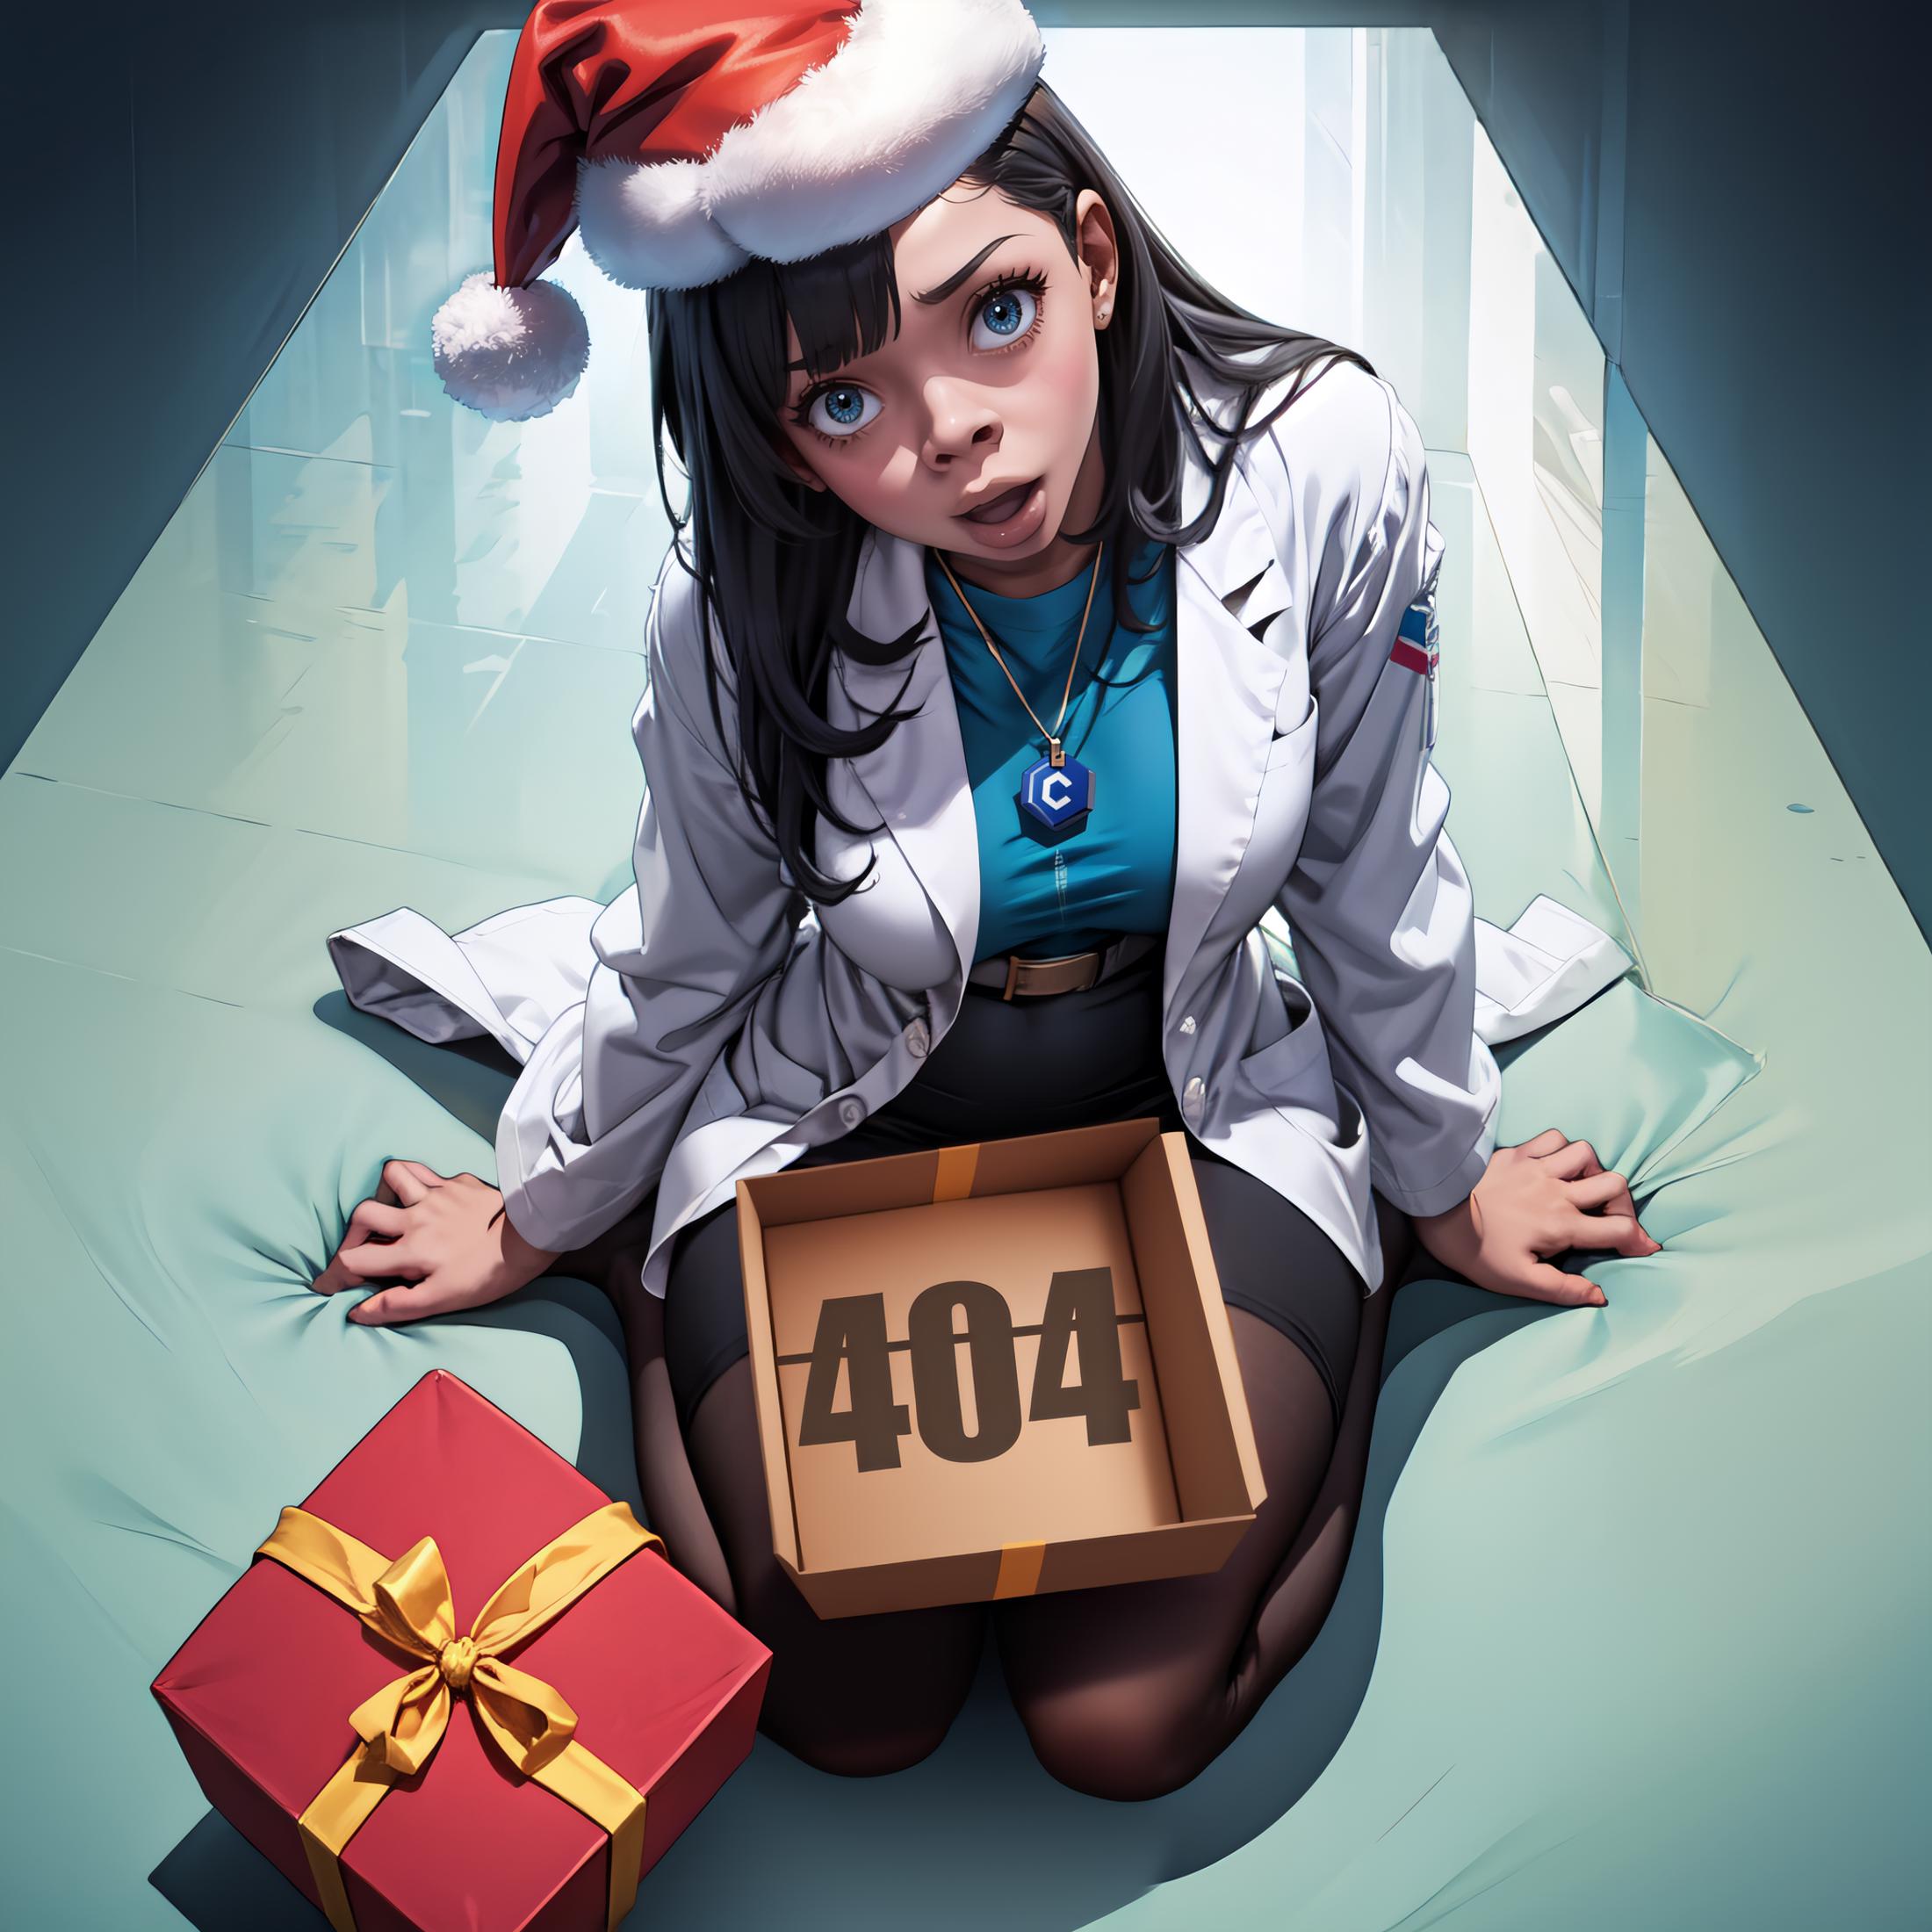 A cartoon woman wearing a Santa hat sitting on a bed with a box labeled "404" in front of her.